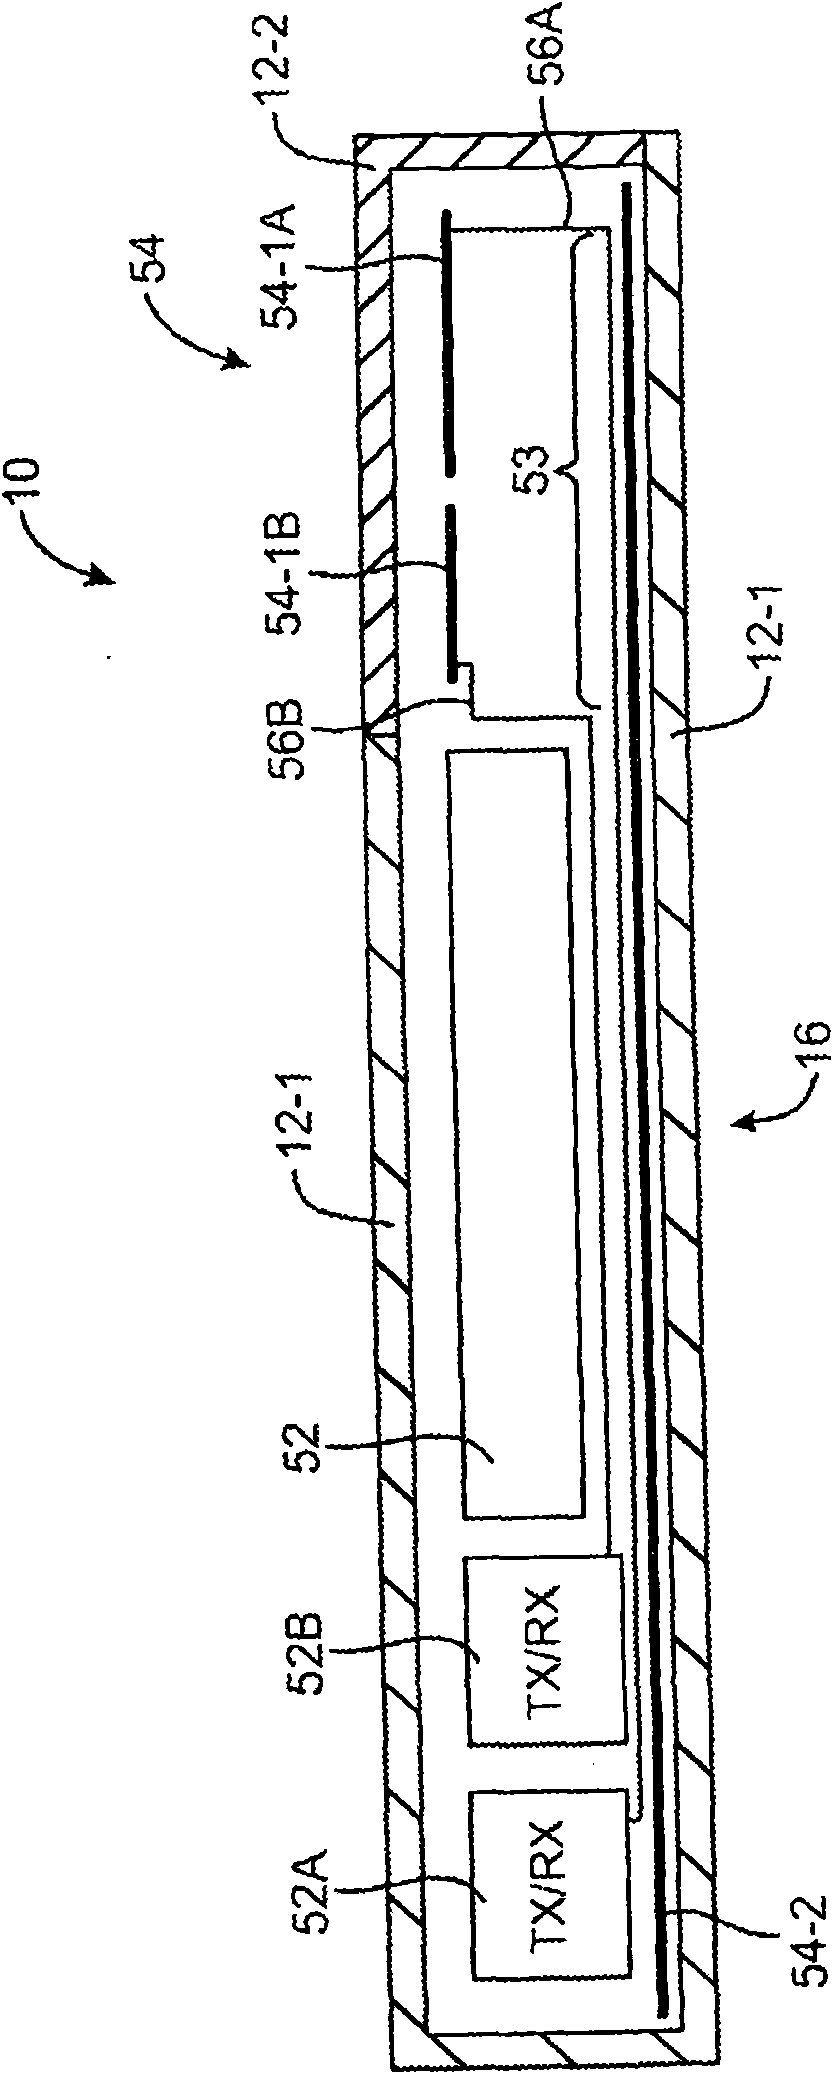 Antennas for handheld electronic devices with conductive bezels